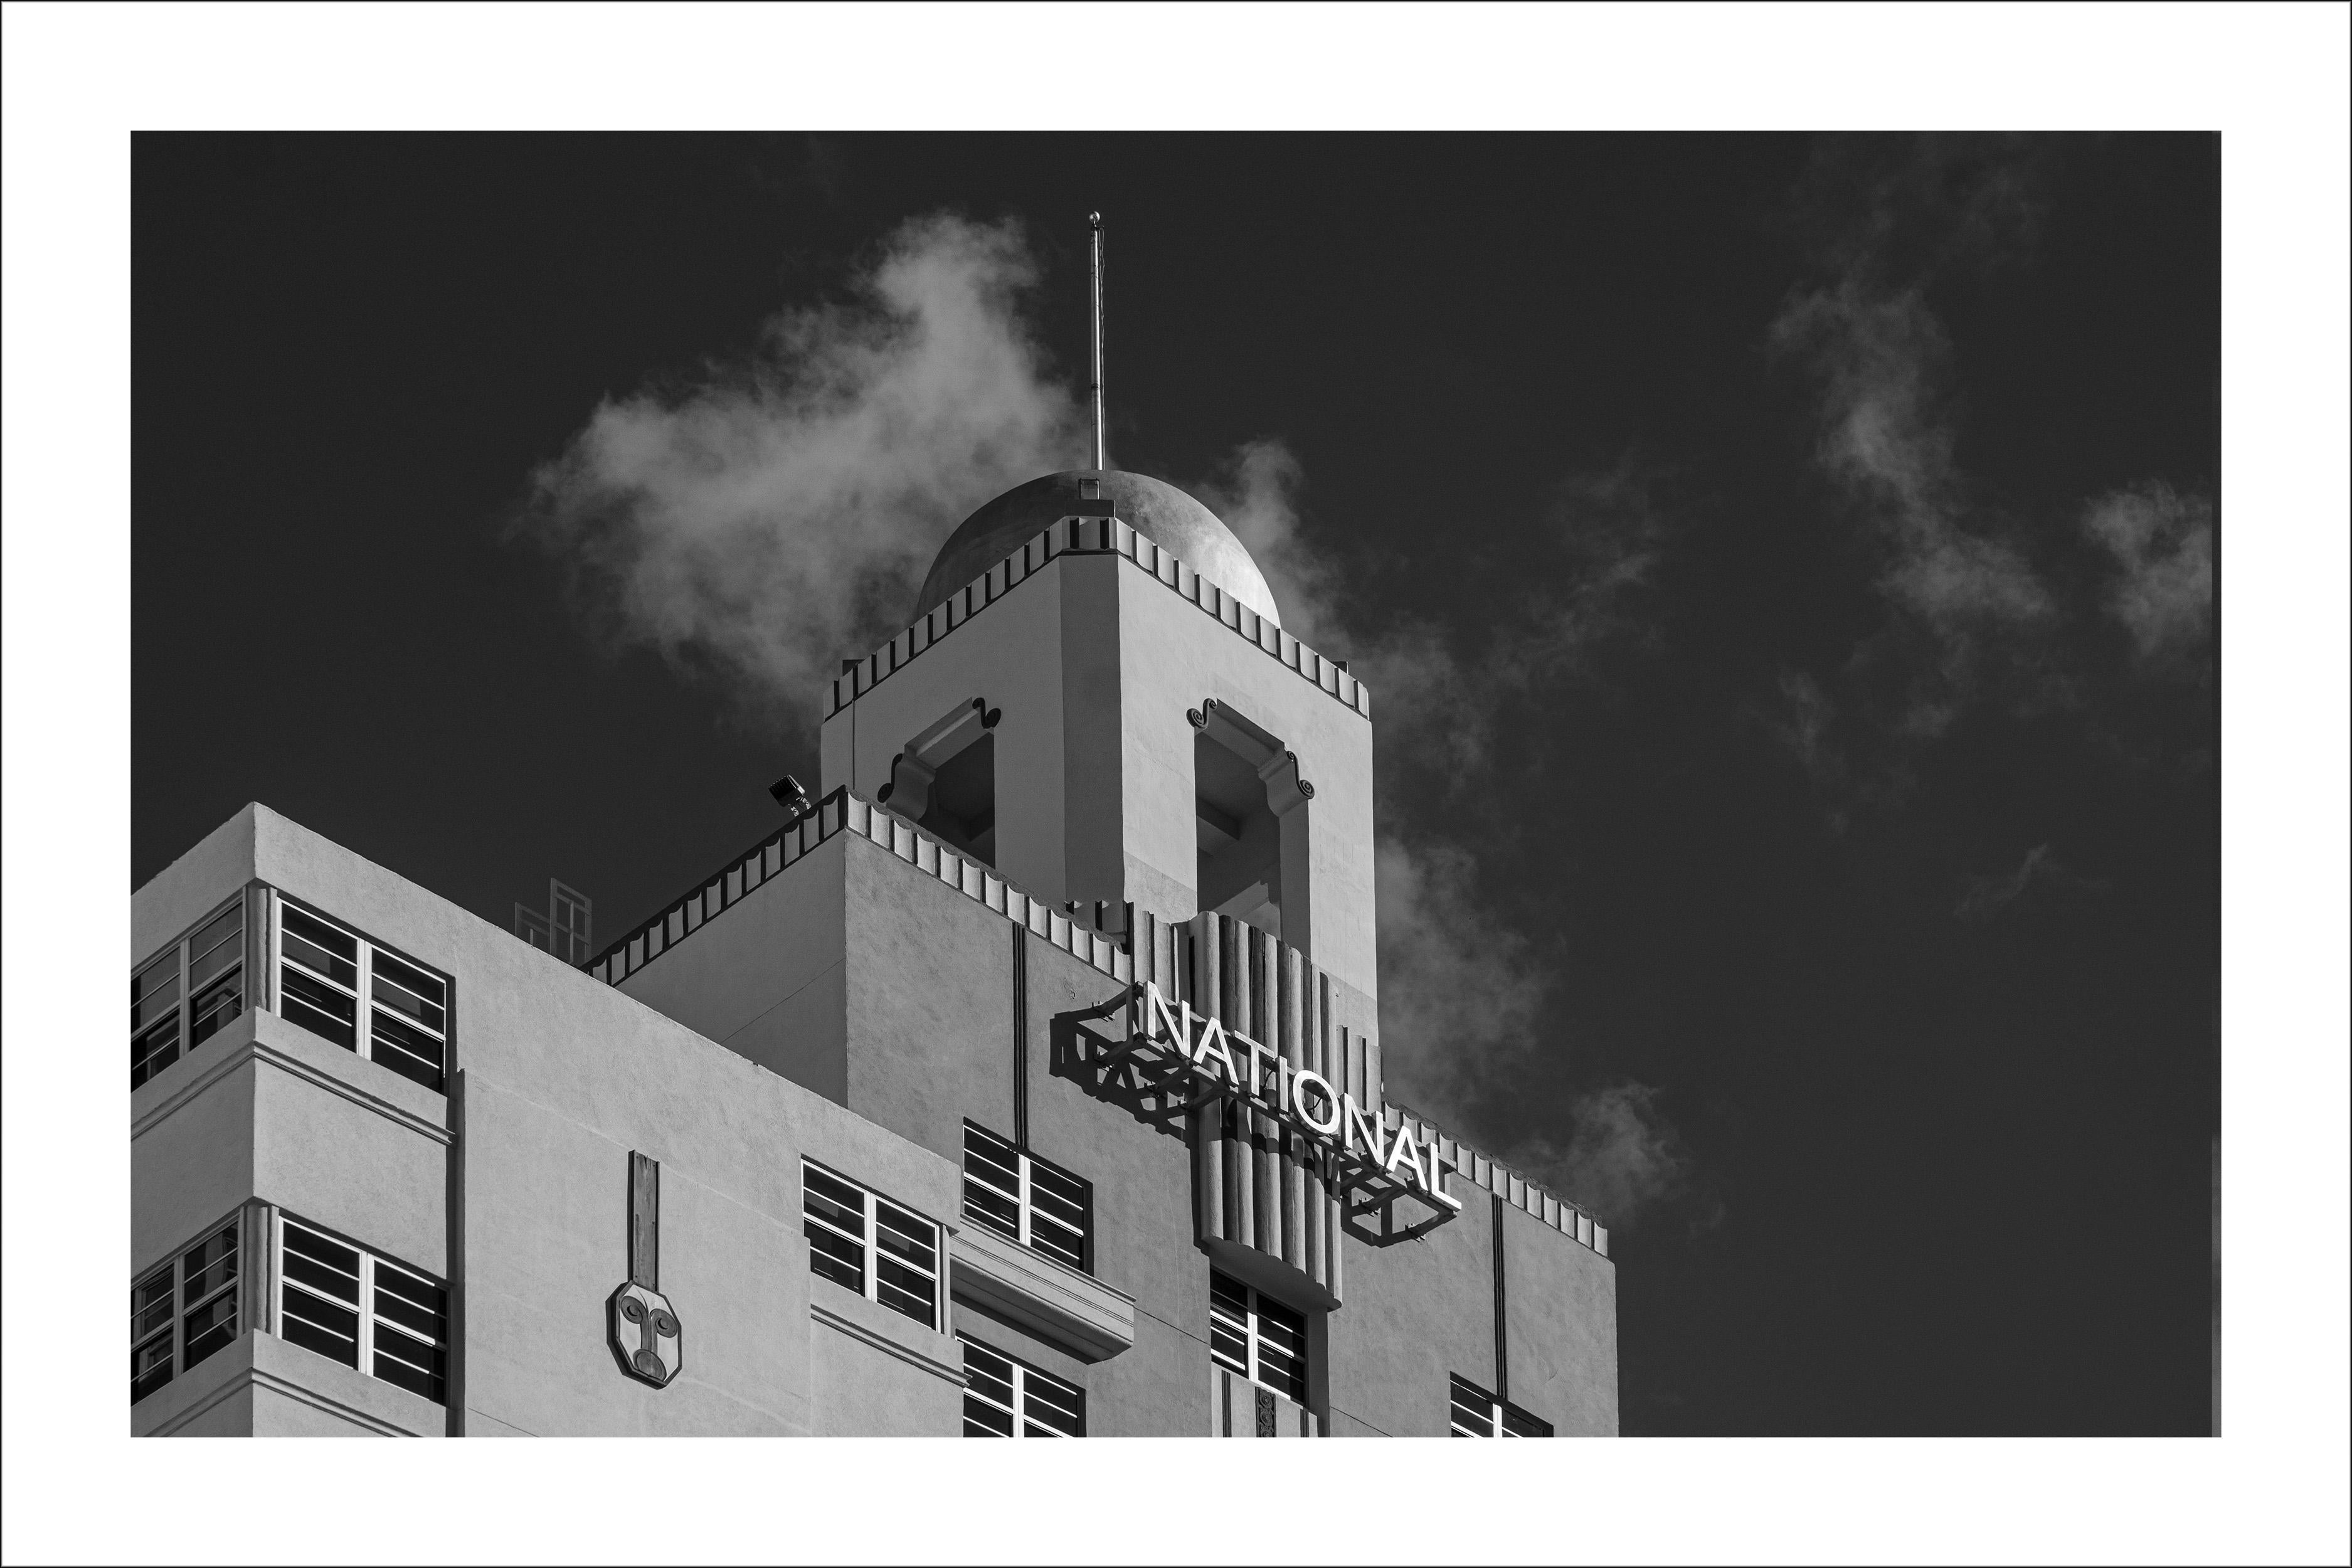 Kind of Cyan Landscape Photograph - The National, Miami Beach Hotel, Black and White Architecture, Regency Style 